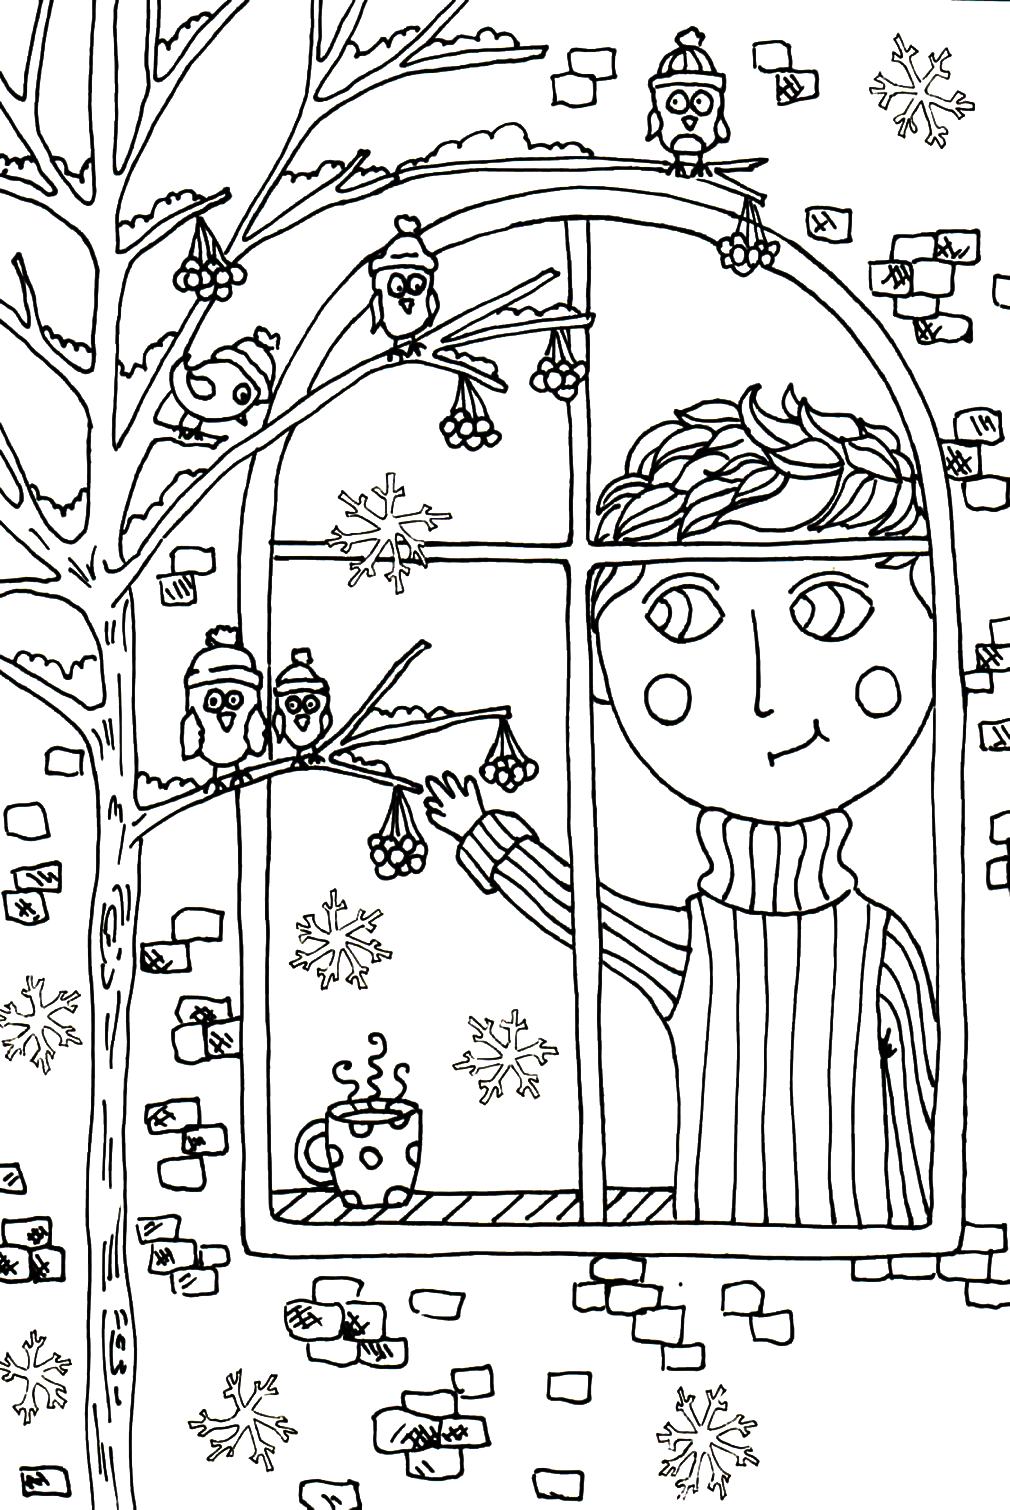 Peter Boy in November Coloring Pages